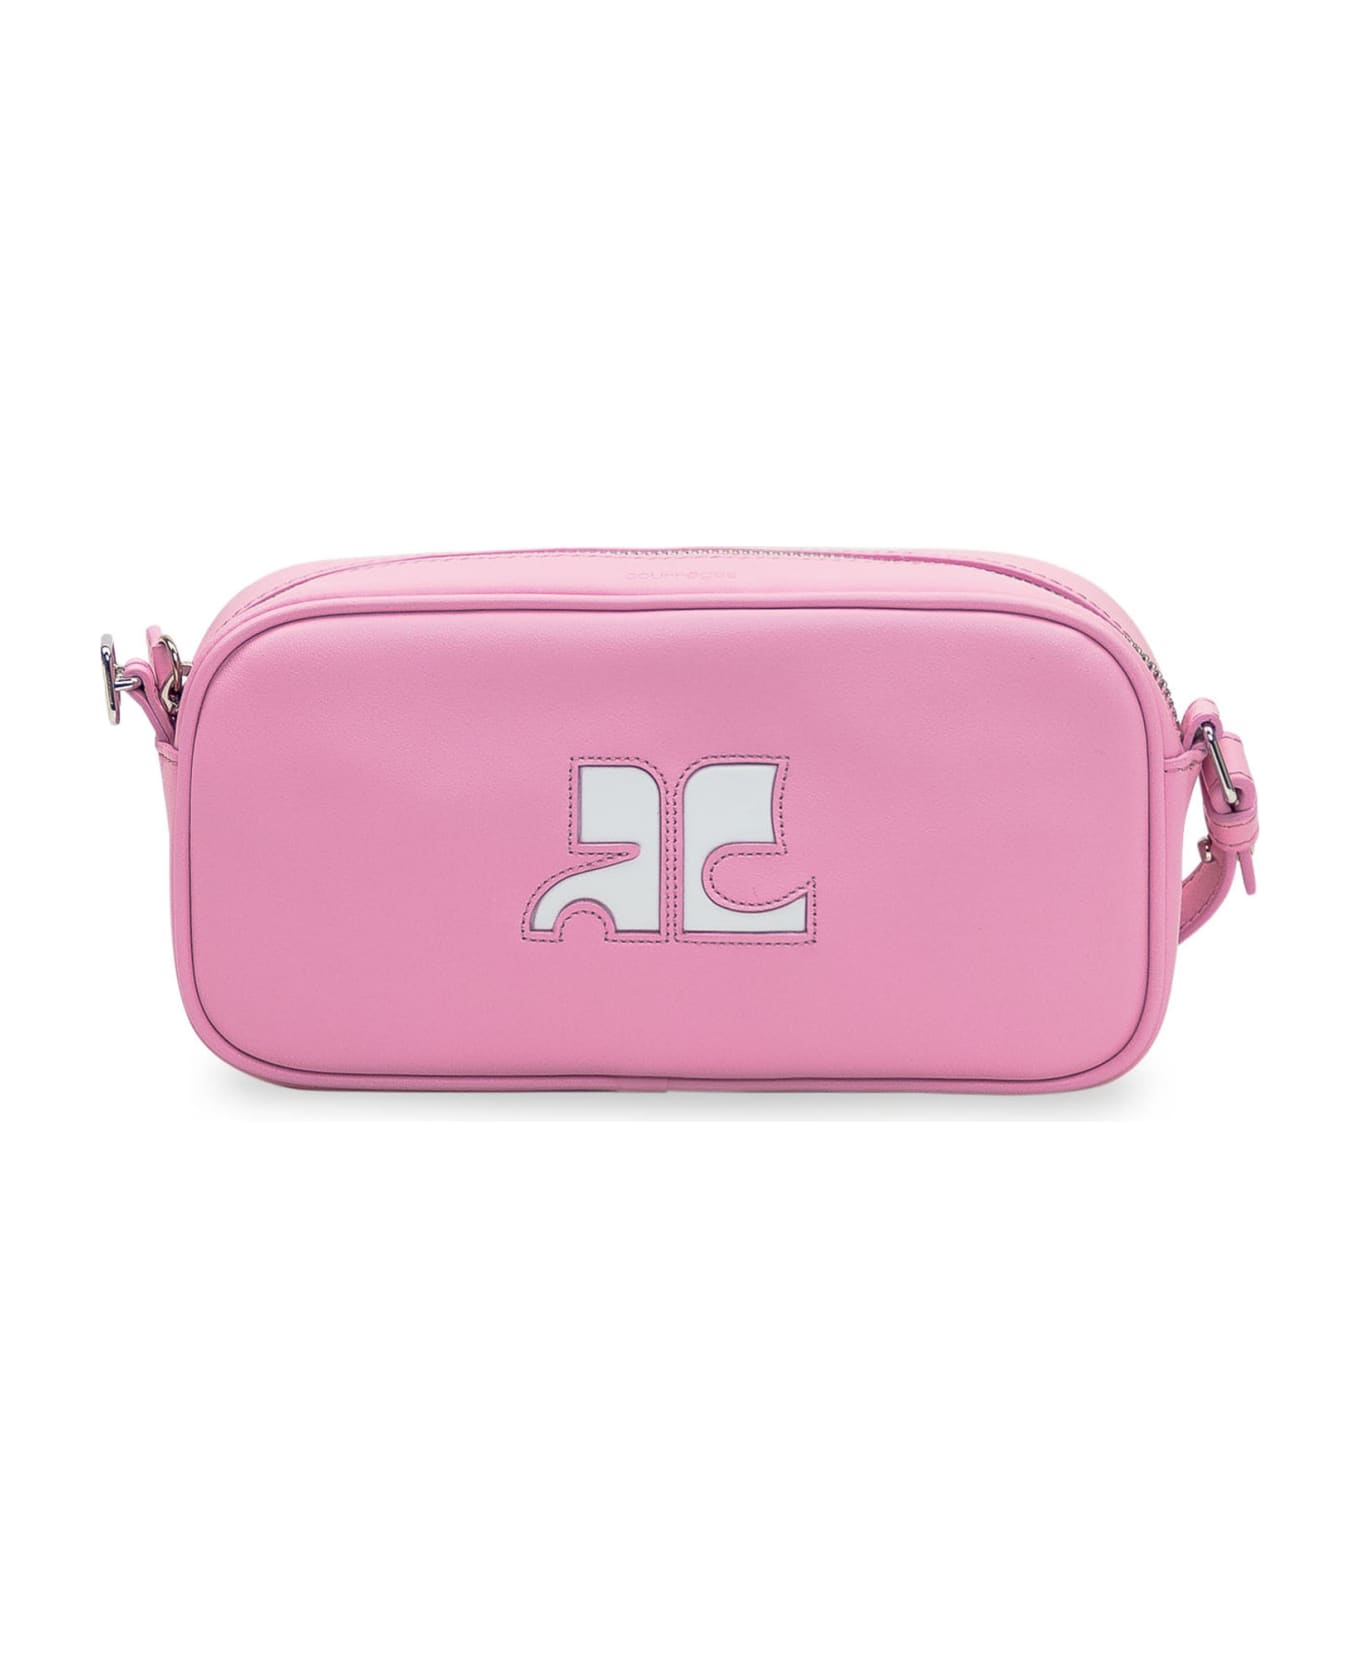 Courrèges Ac Bag - CANDY PINK ショルダーバッグ